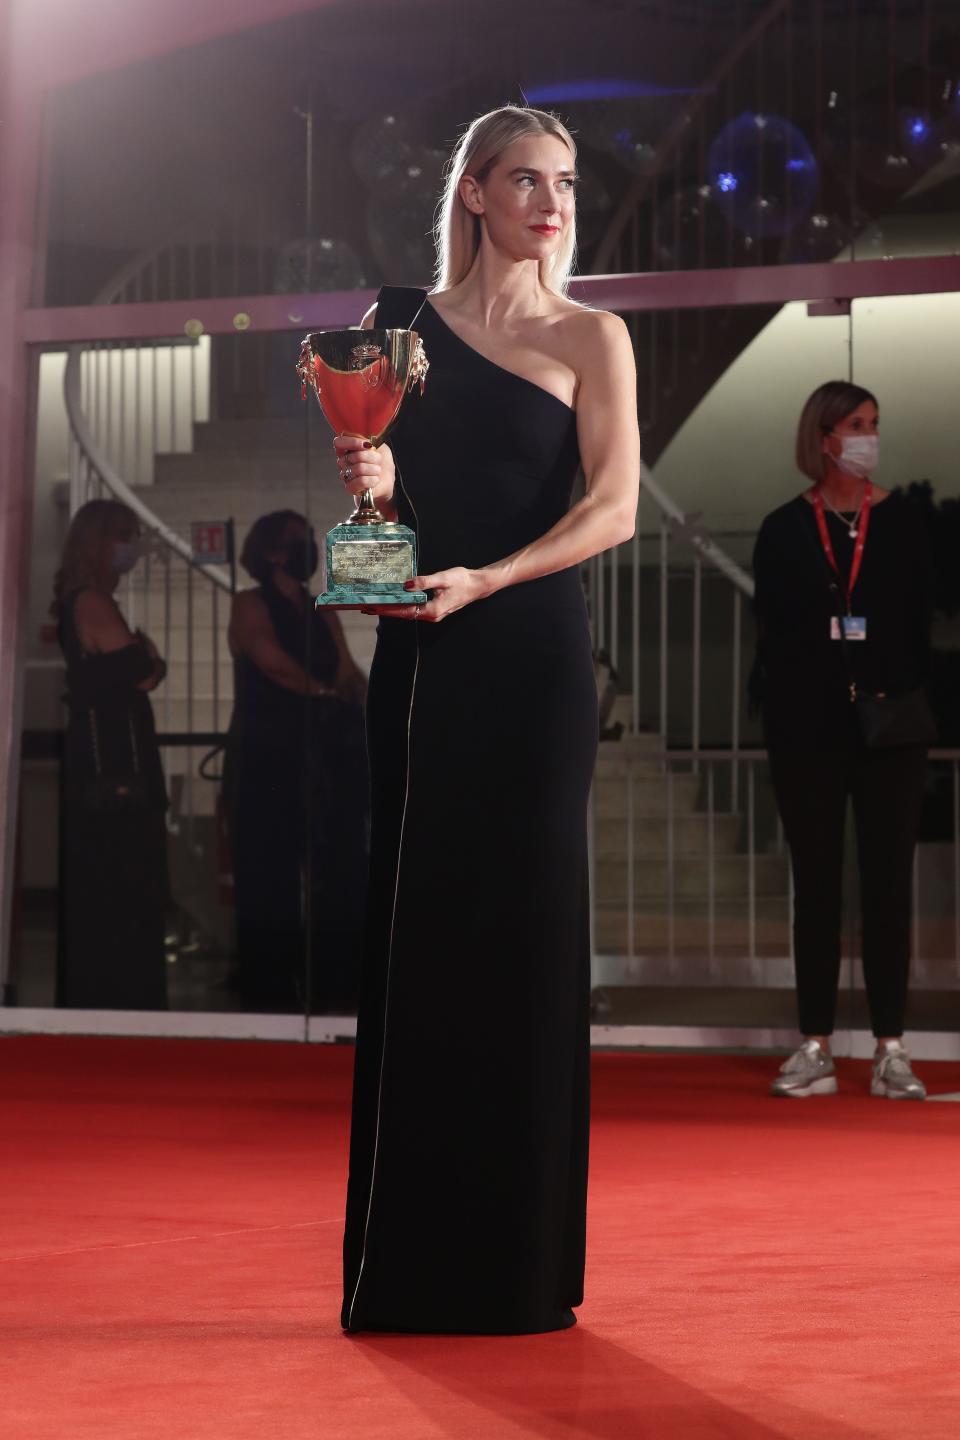 Vanessa Kirby poses with the Coppa Volpi prize for best actress in "Pieces of a Woman" at the Venice Film Festival.